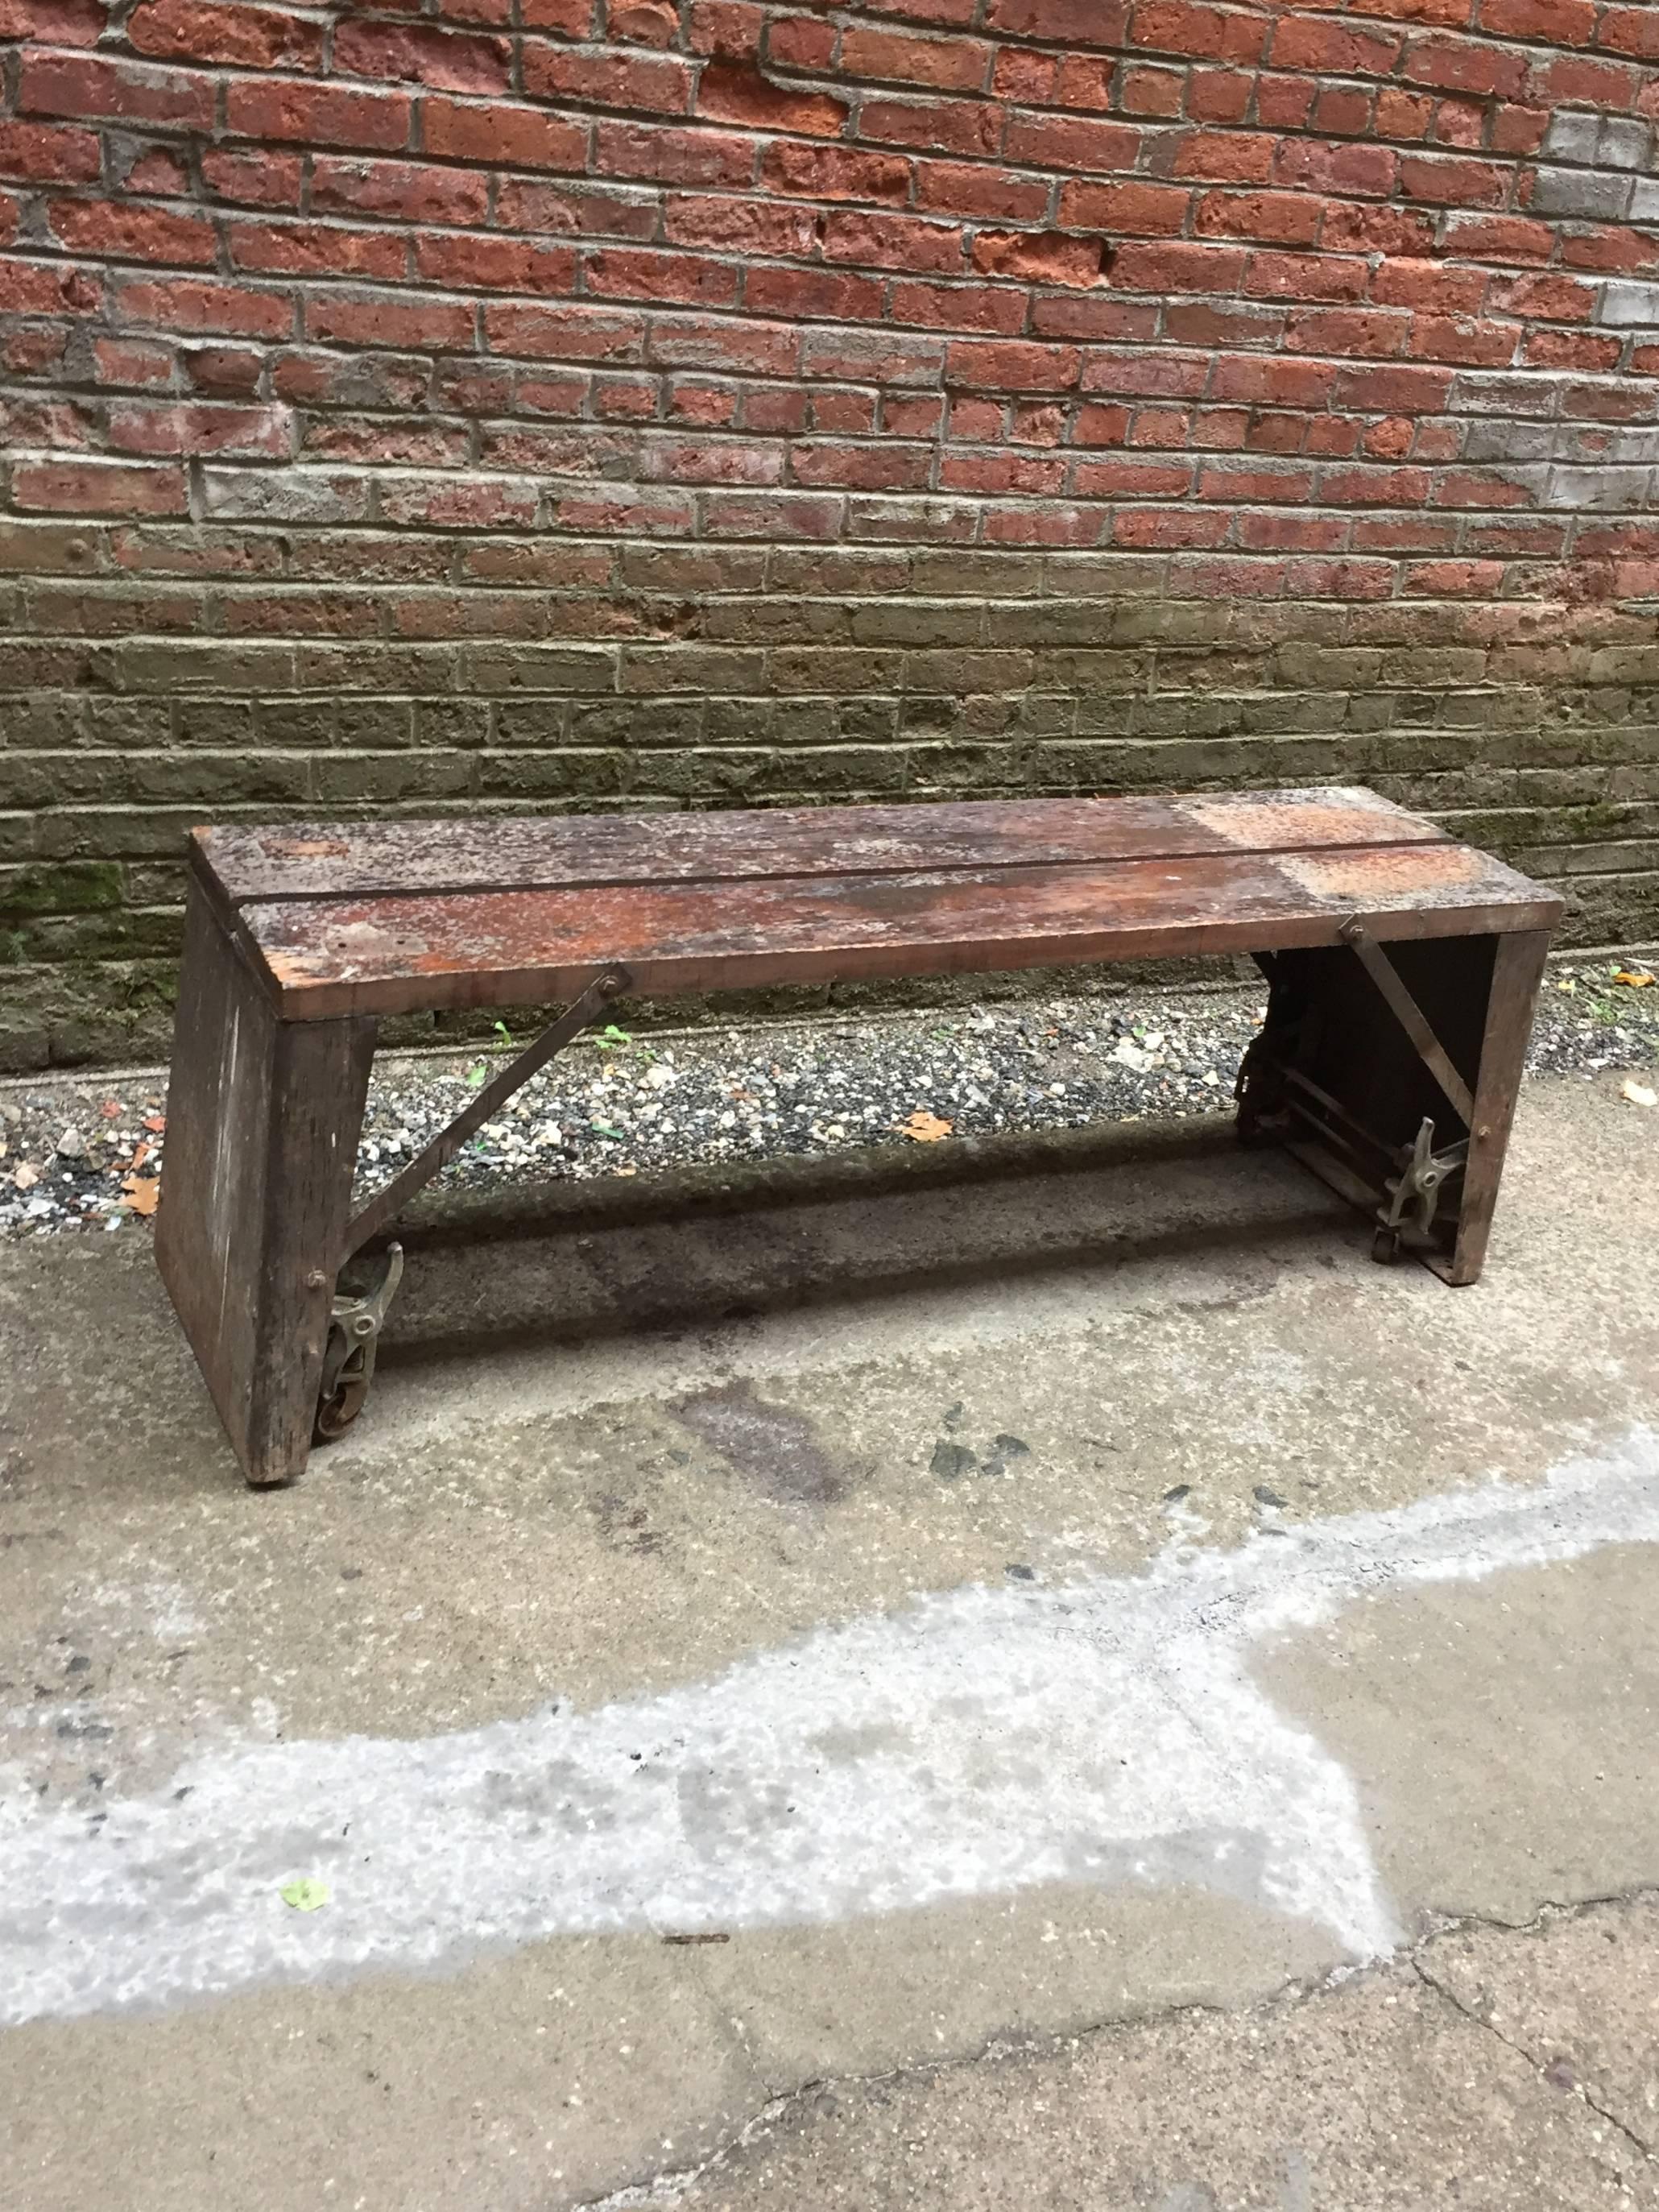 Excellent entry way or mud room bench. Originally, there was a lathe attached to the bench, but it has long been removed. The wheels lock down for easy rolling and unlock once it is in place. Distressed two board wood seat with flared, reinforced